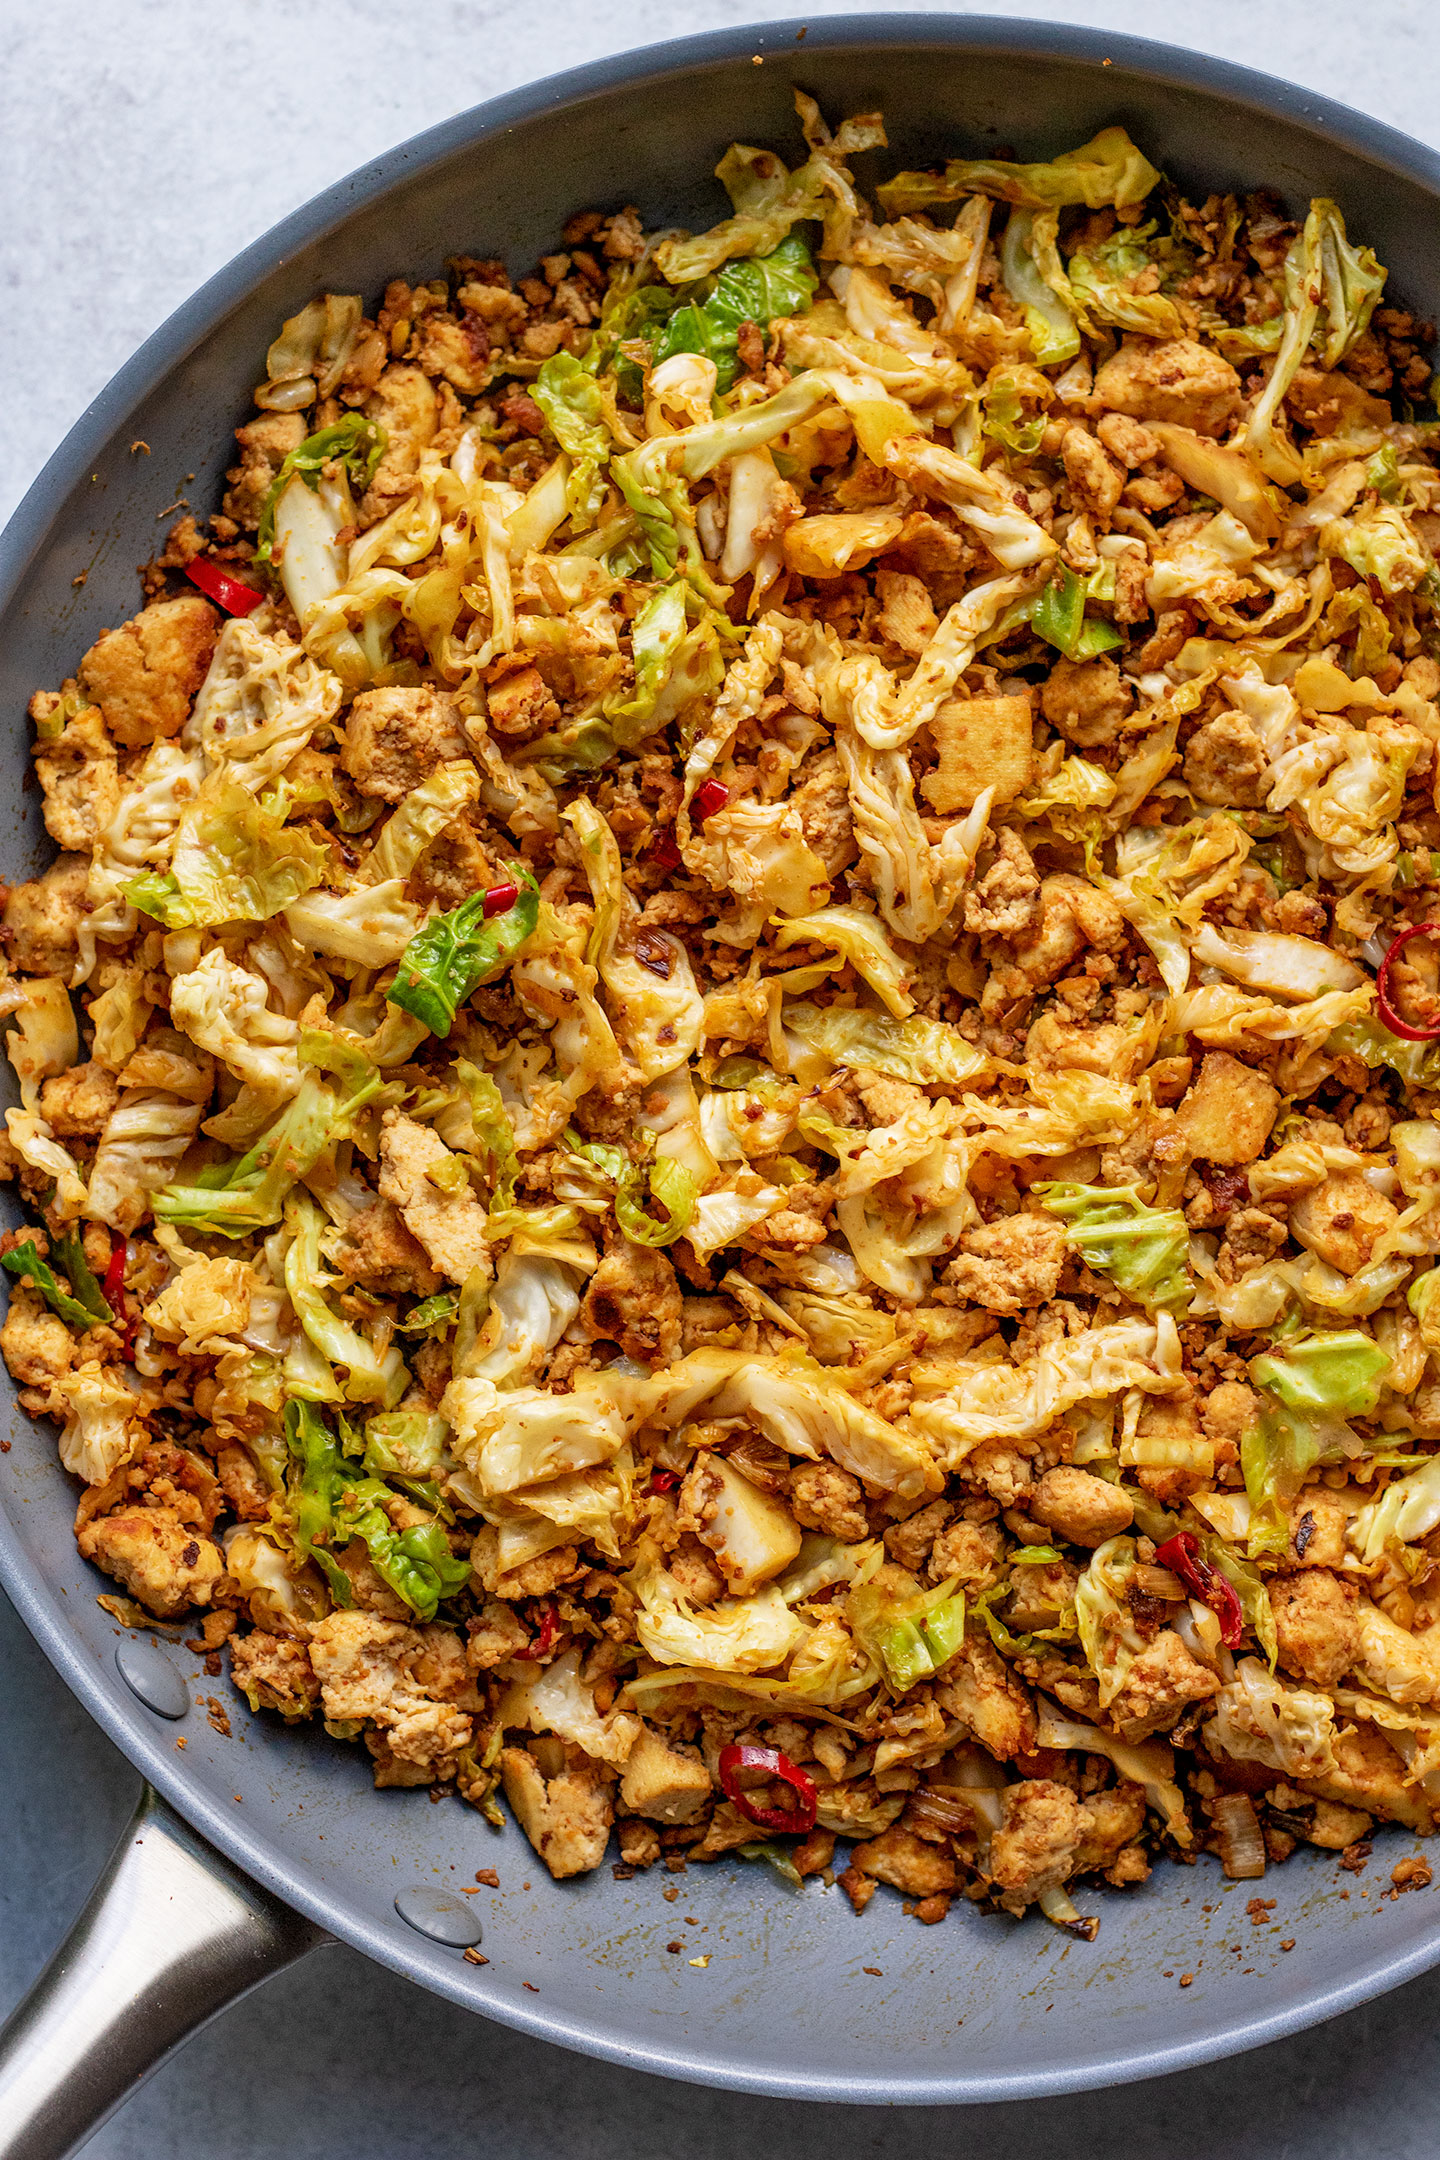 Sautéed cabbage and tofu in a large skillet.